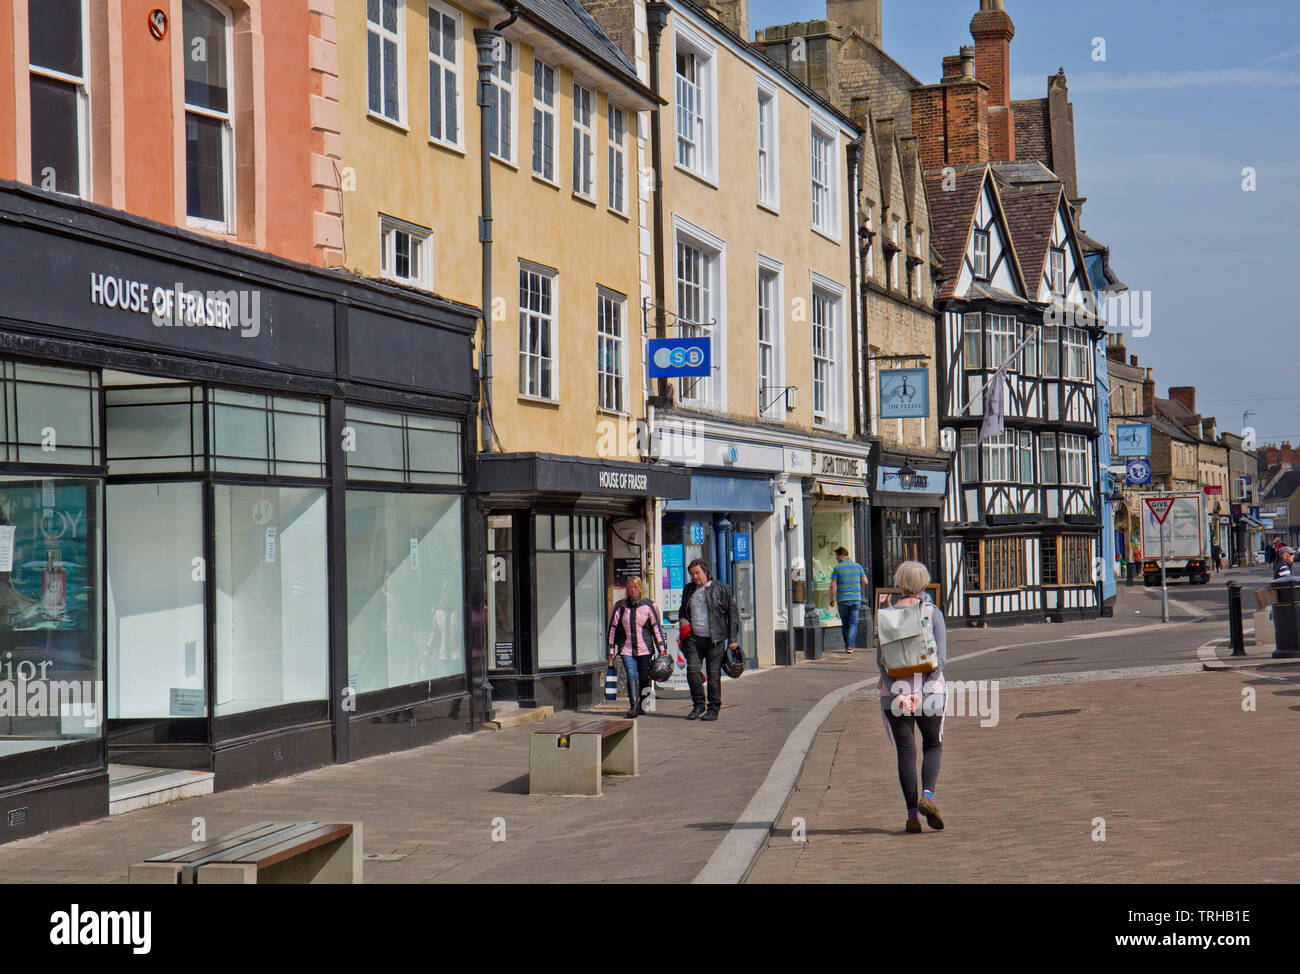 Cirencester town centre, Gloucestershire, England Stock Photo